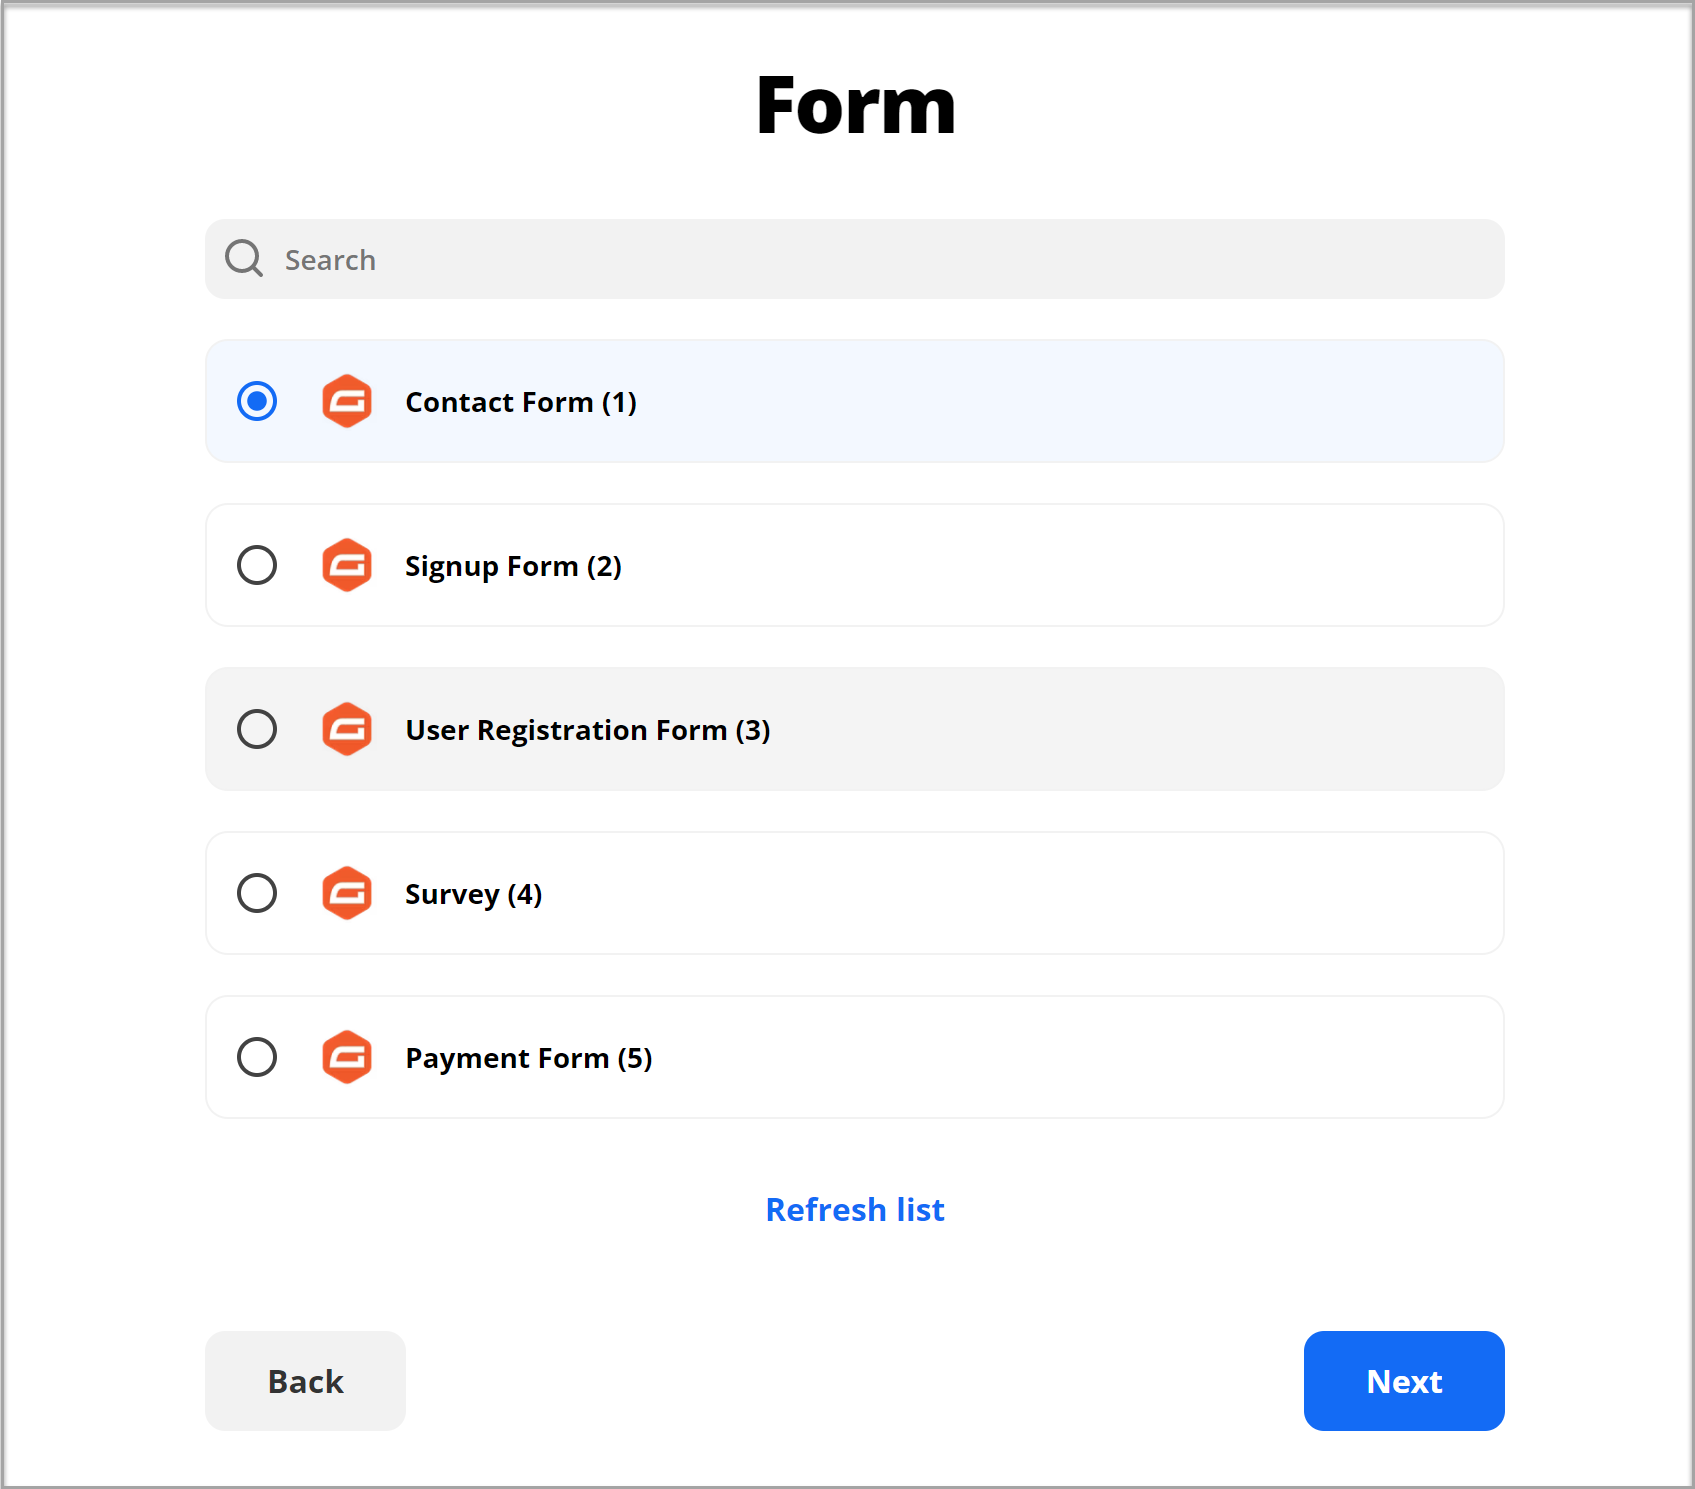 Select a Form